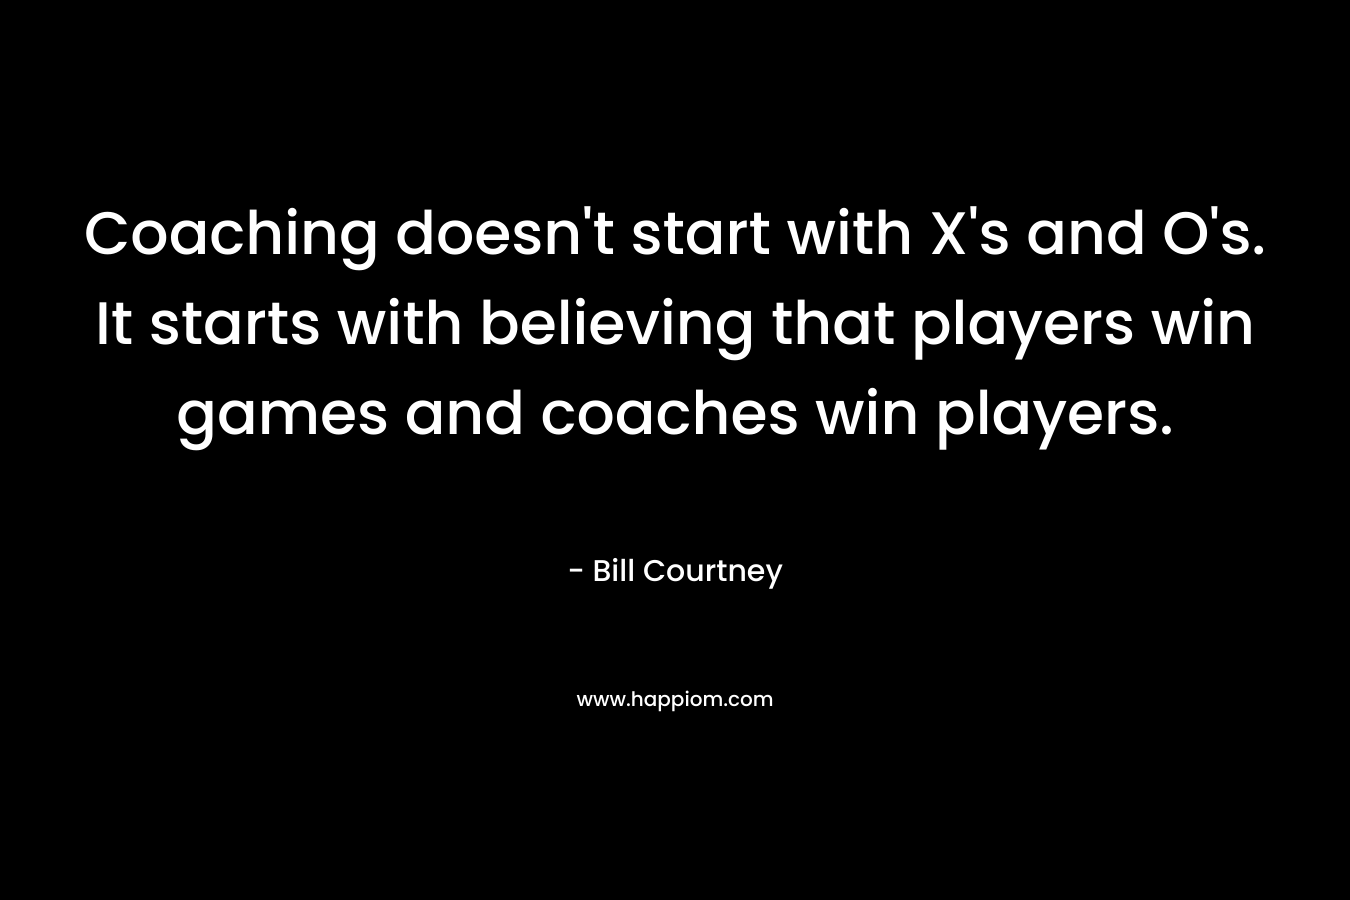 Coaching doesn’t start with X’s and O’s. It starts with believing that players win games and coaches win players. – Bill Courtney